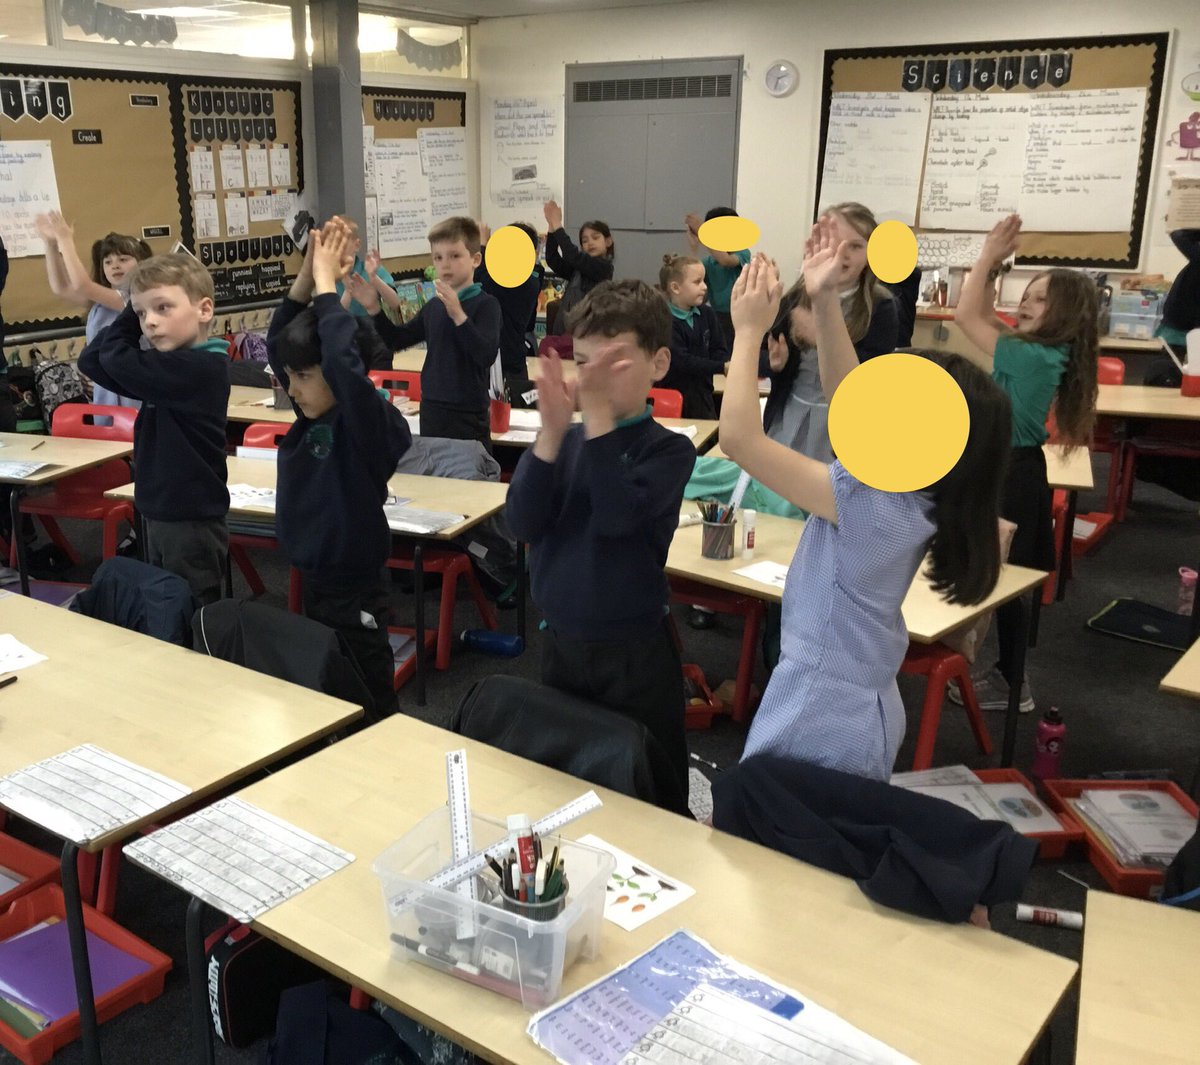 Great fun doing body percussion for Green Love songs with Ollie today! Well done everyone! #unitedingreenlove #candomusic @United_Music1 @UnitedLearning @2hhamdingle @ollietdrums @BeatGoesOnUK